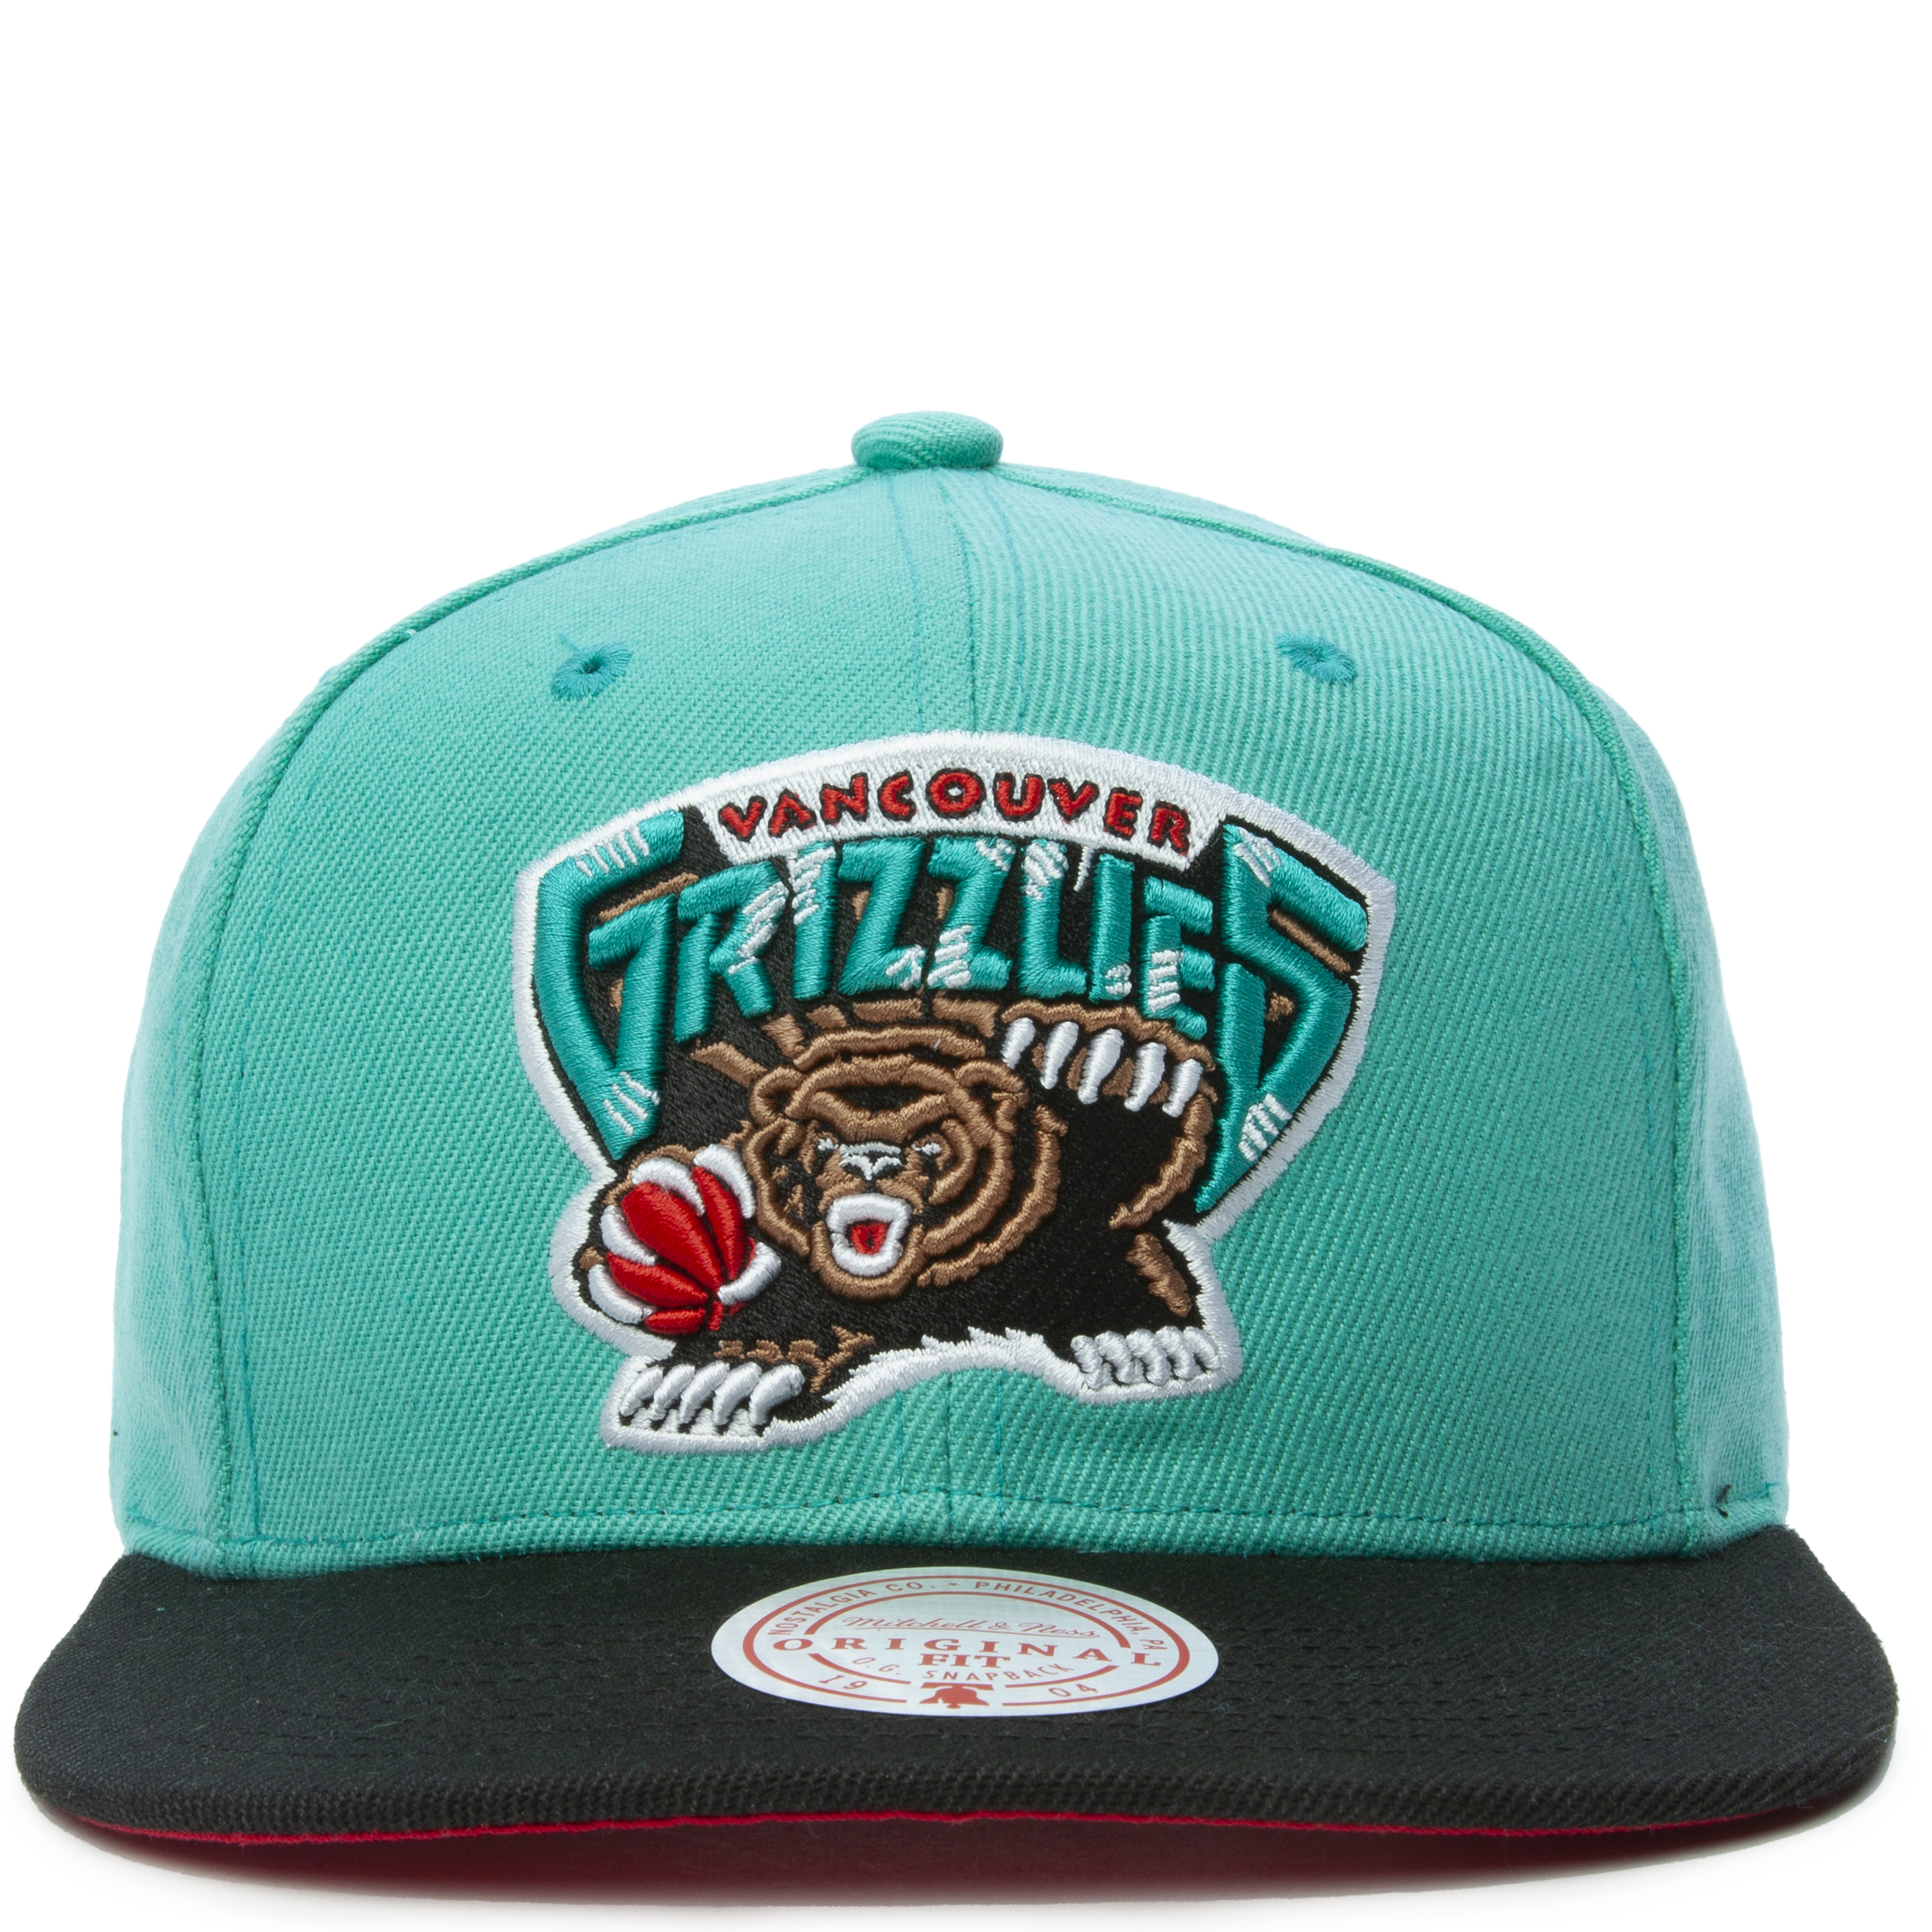 Memphis Grizzlies Hats, Grizzlies Snapbacks, Fitted Hats, Beanies